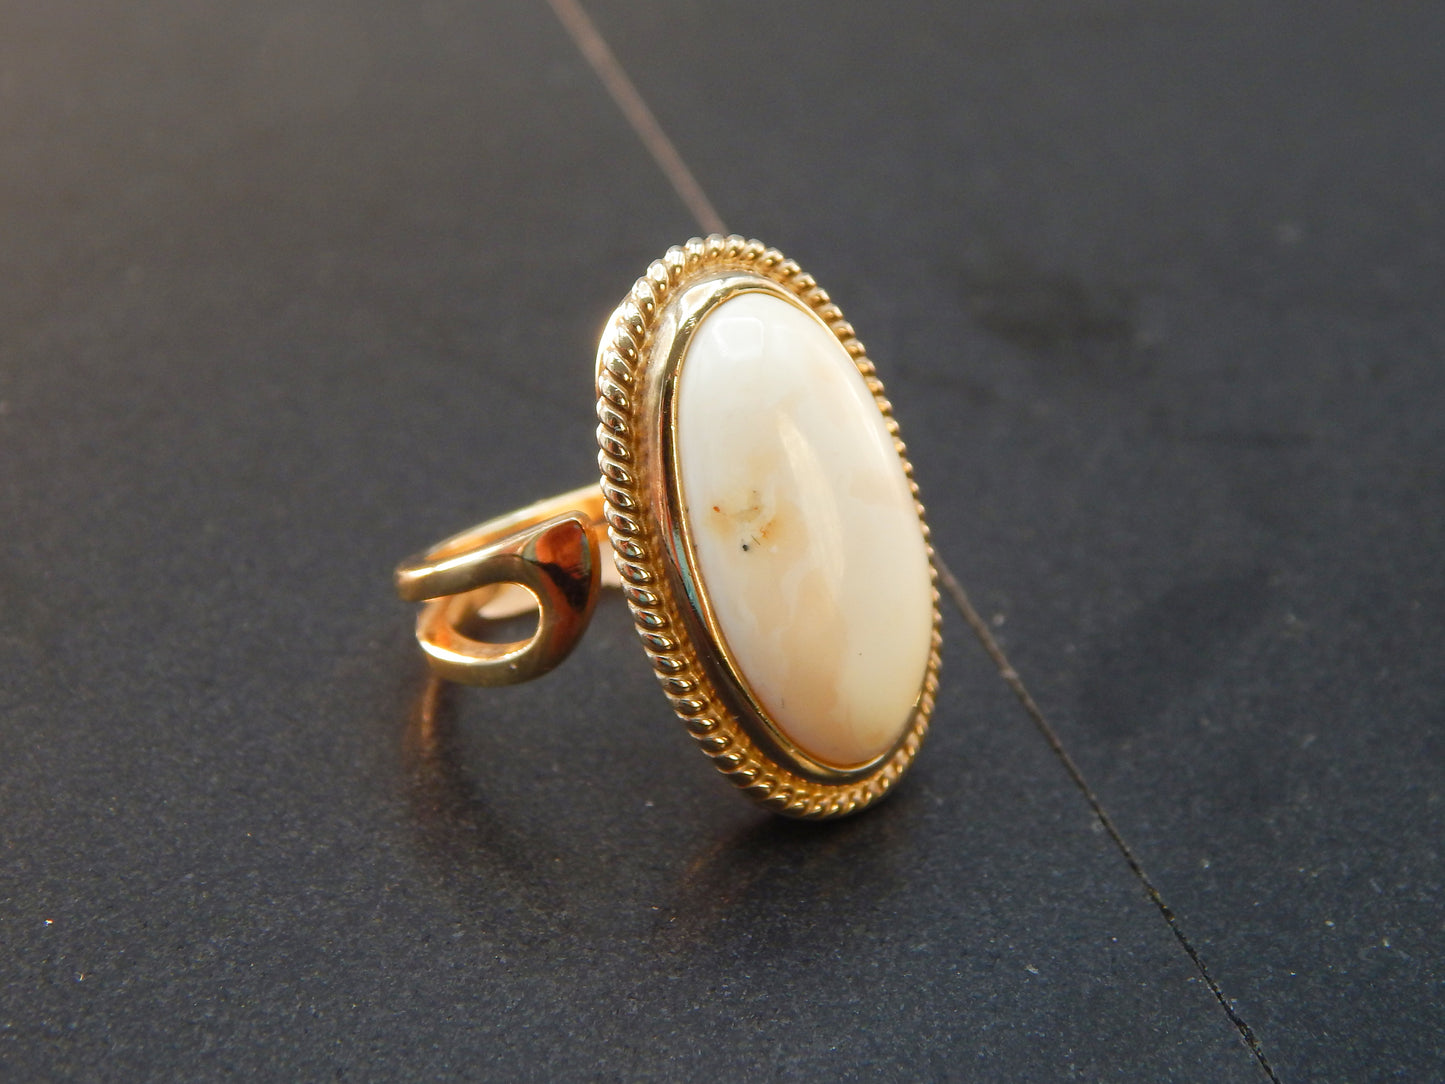 Natural Baltic Rare White Amber Victorian Ring in 14k Gold Plated s925